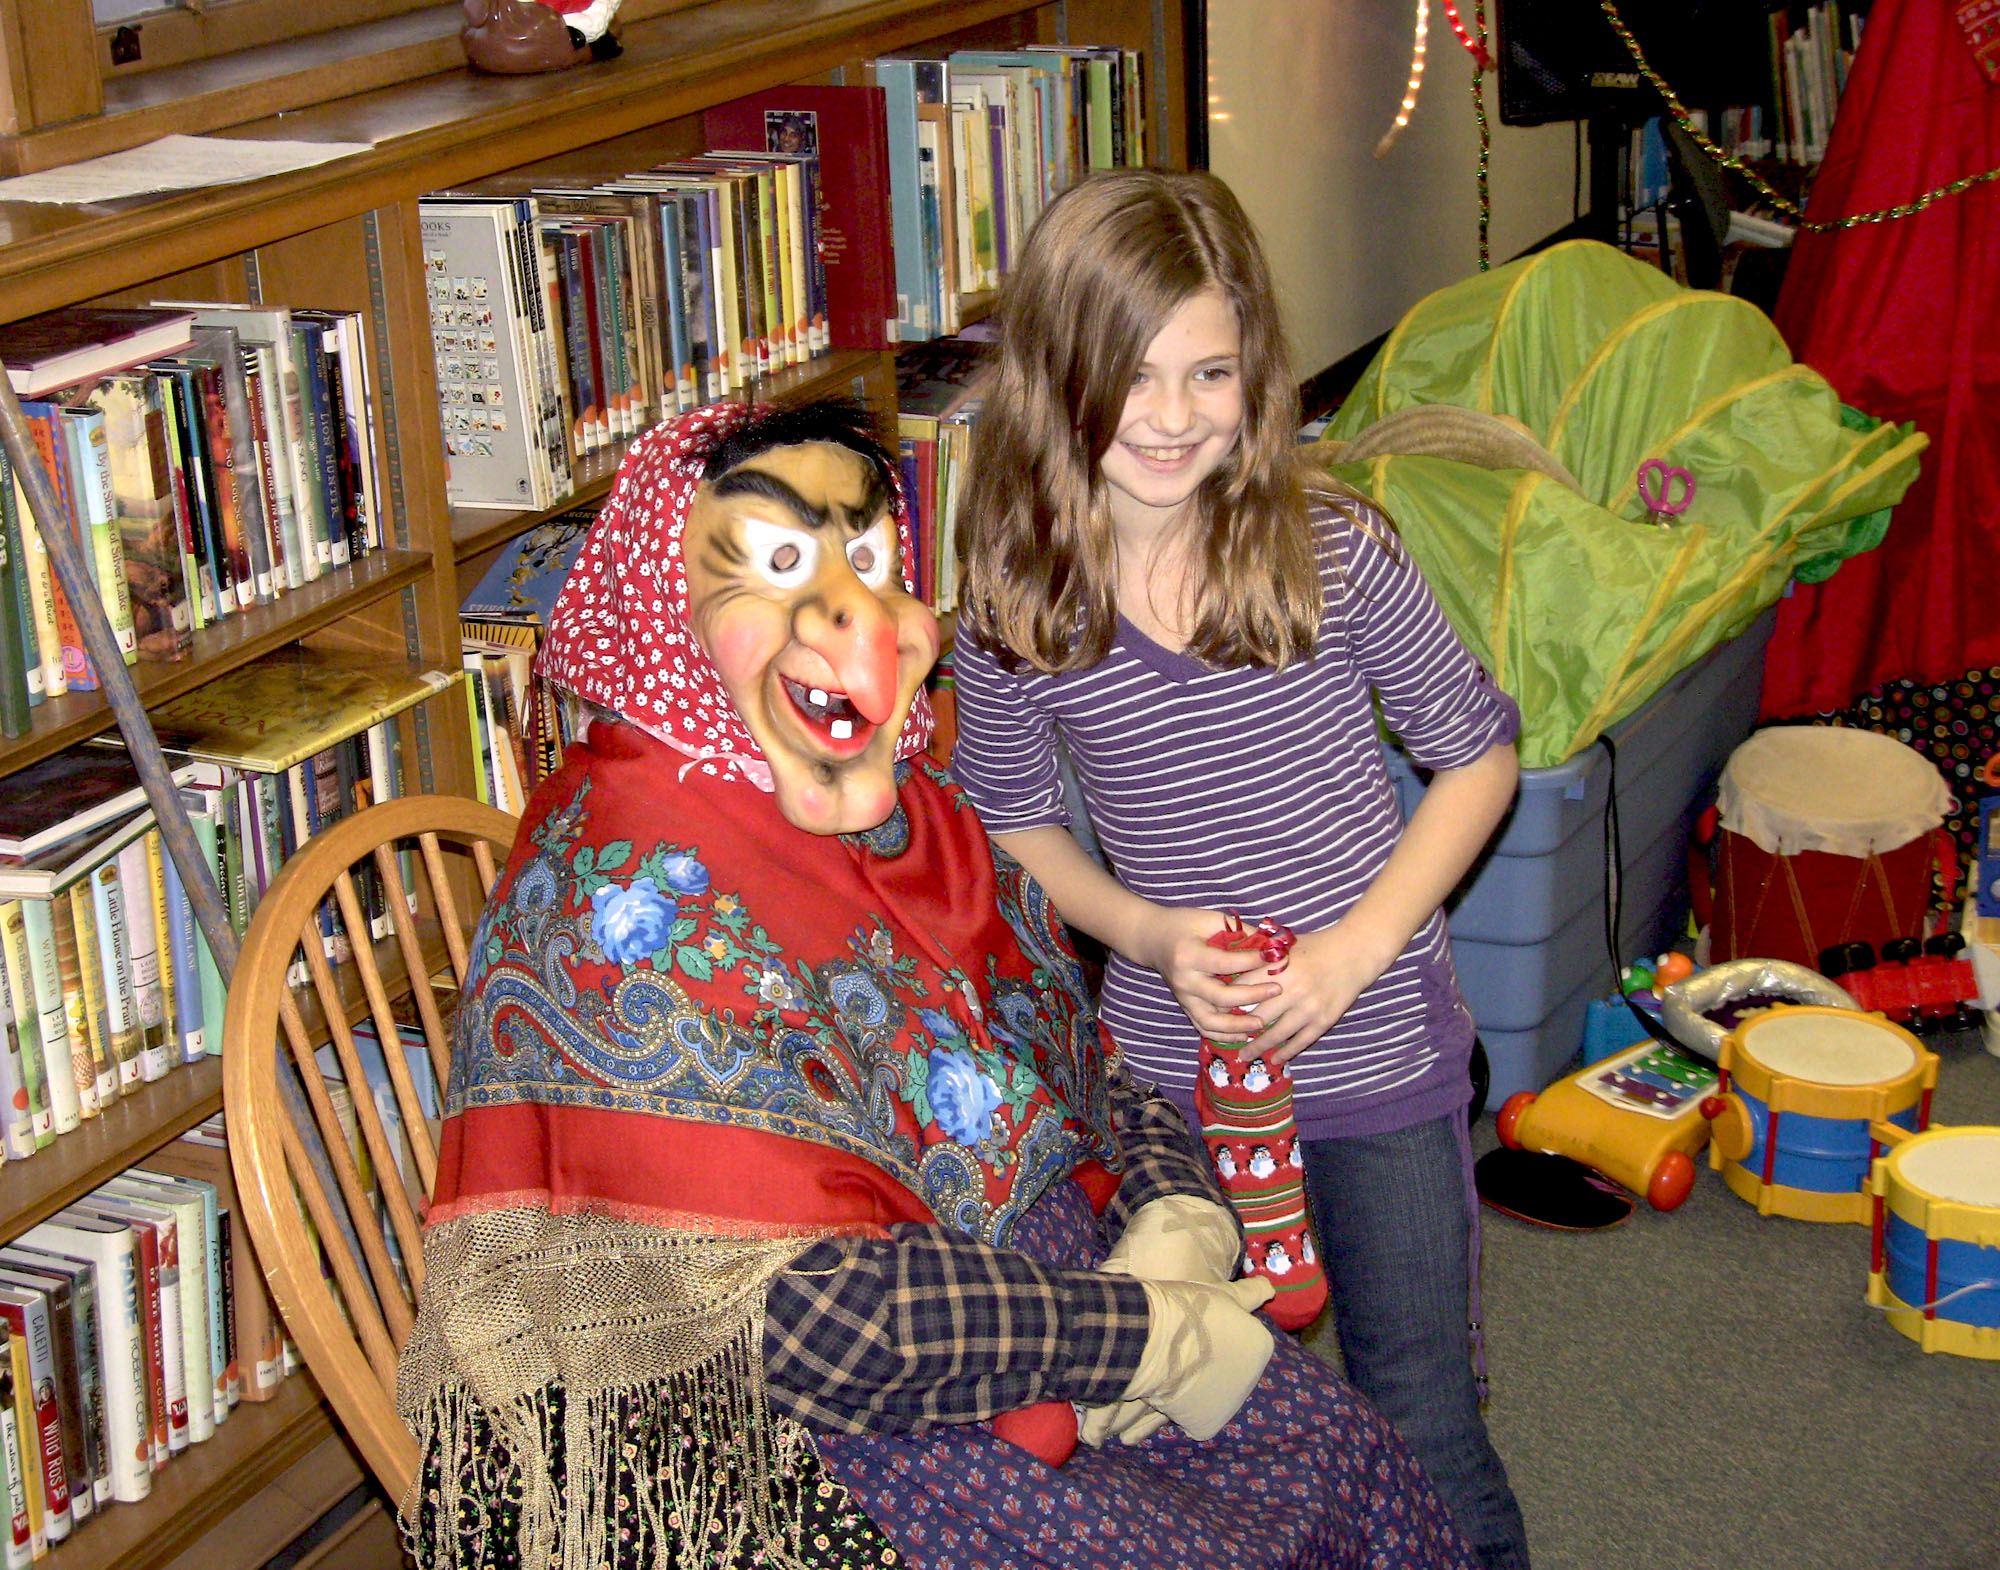 La Befana with a young girl.